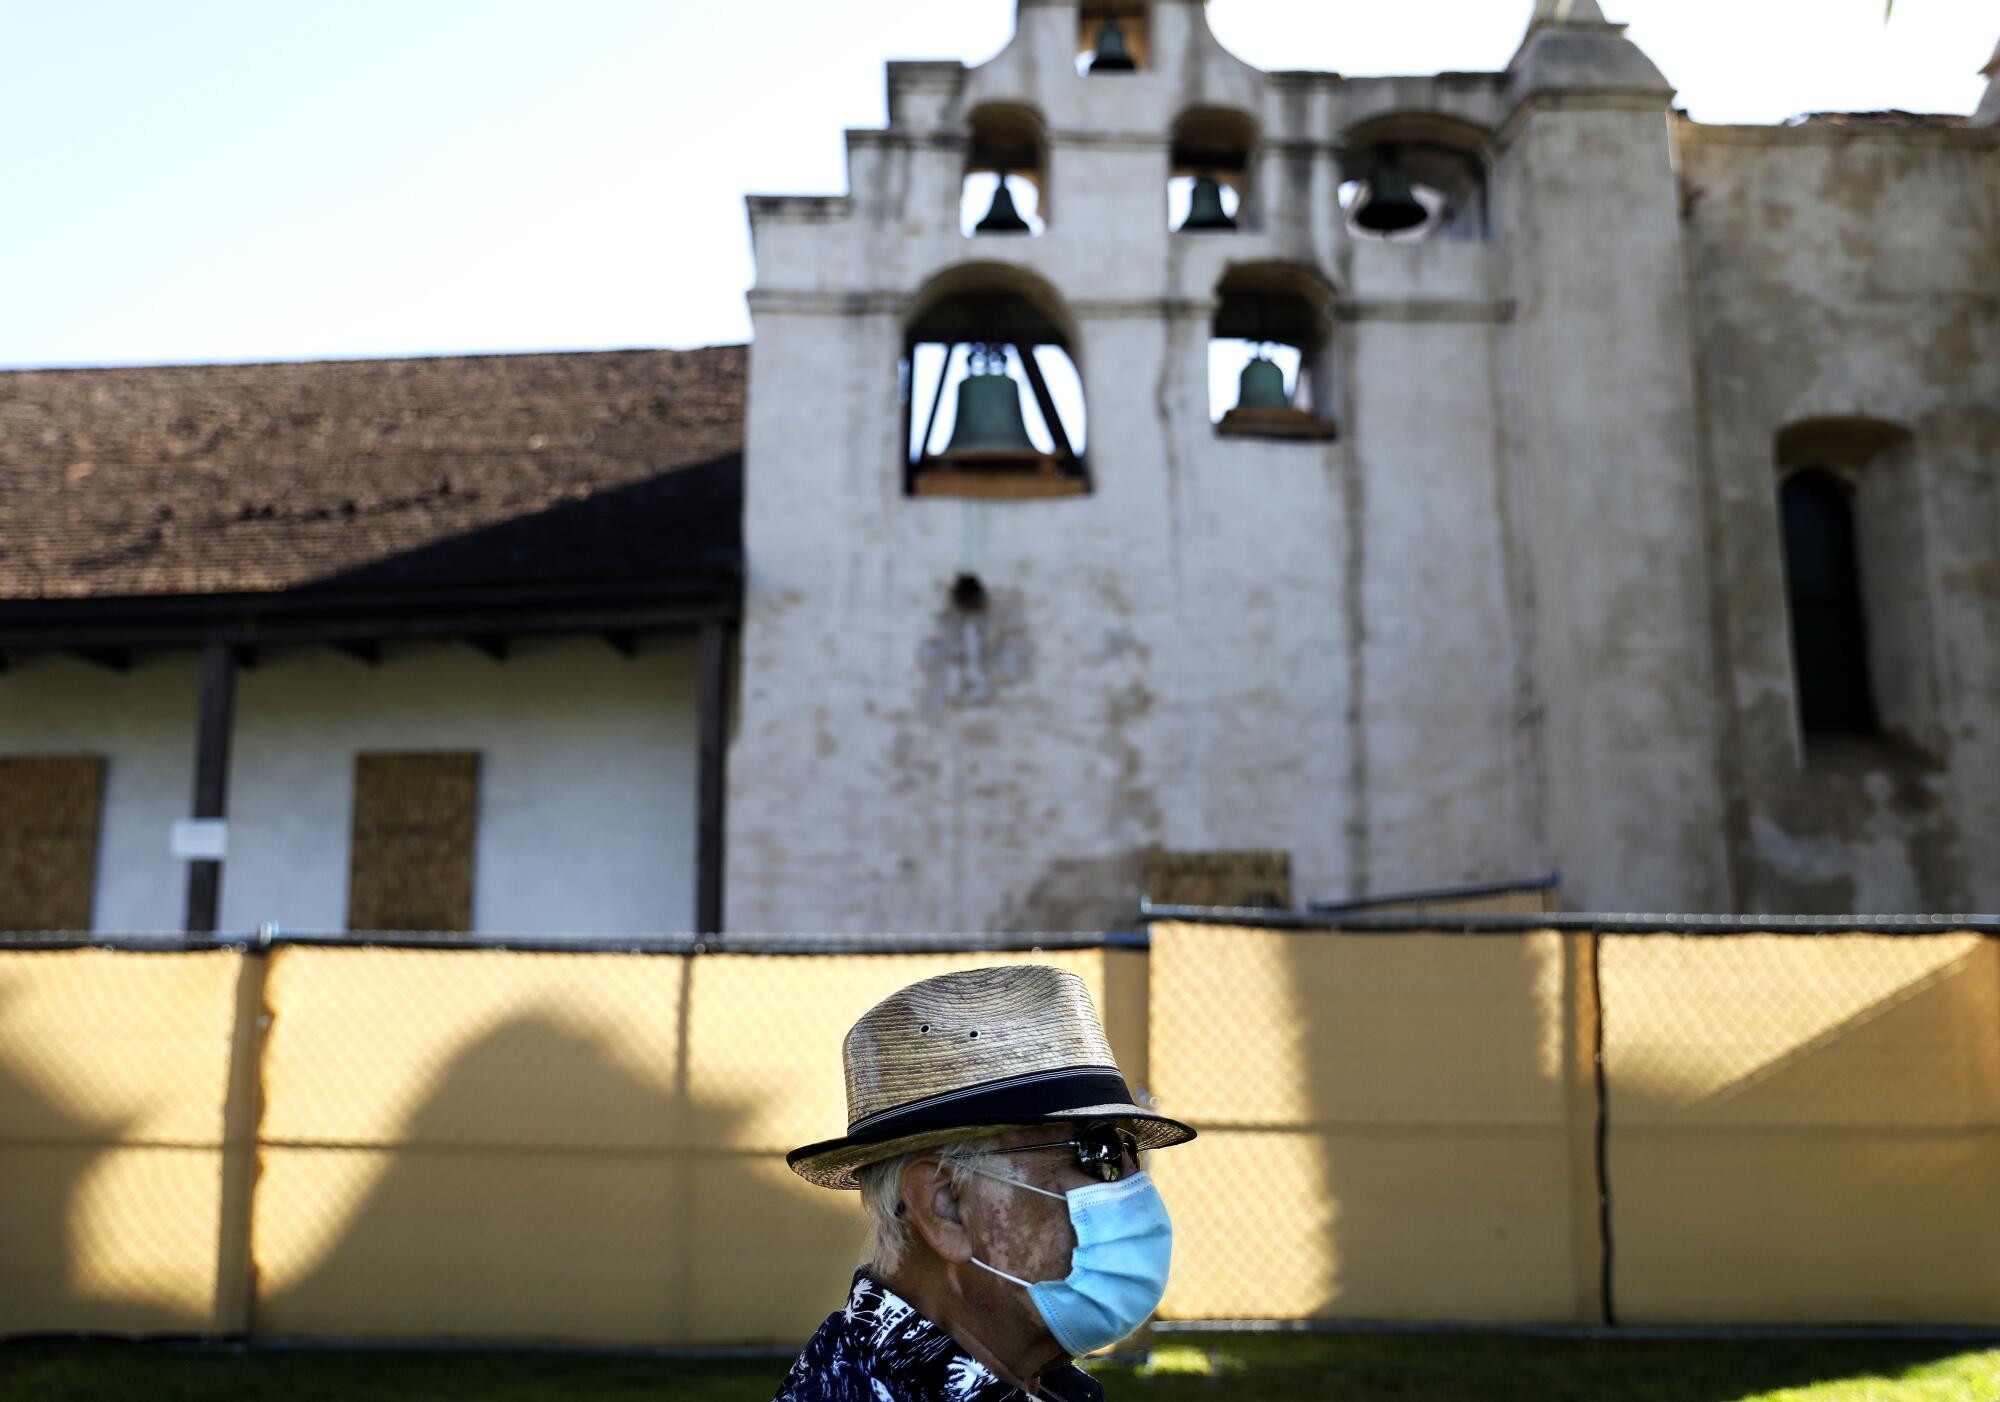 Nick Delgado, 80, of El Monte, spent much of his life at the San Gabriel Mission.